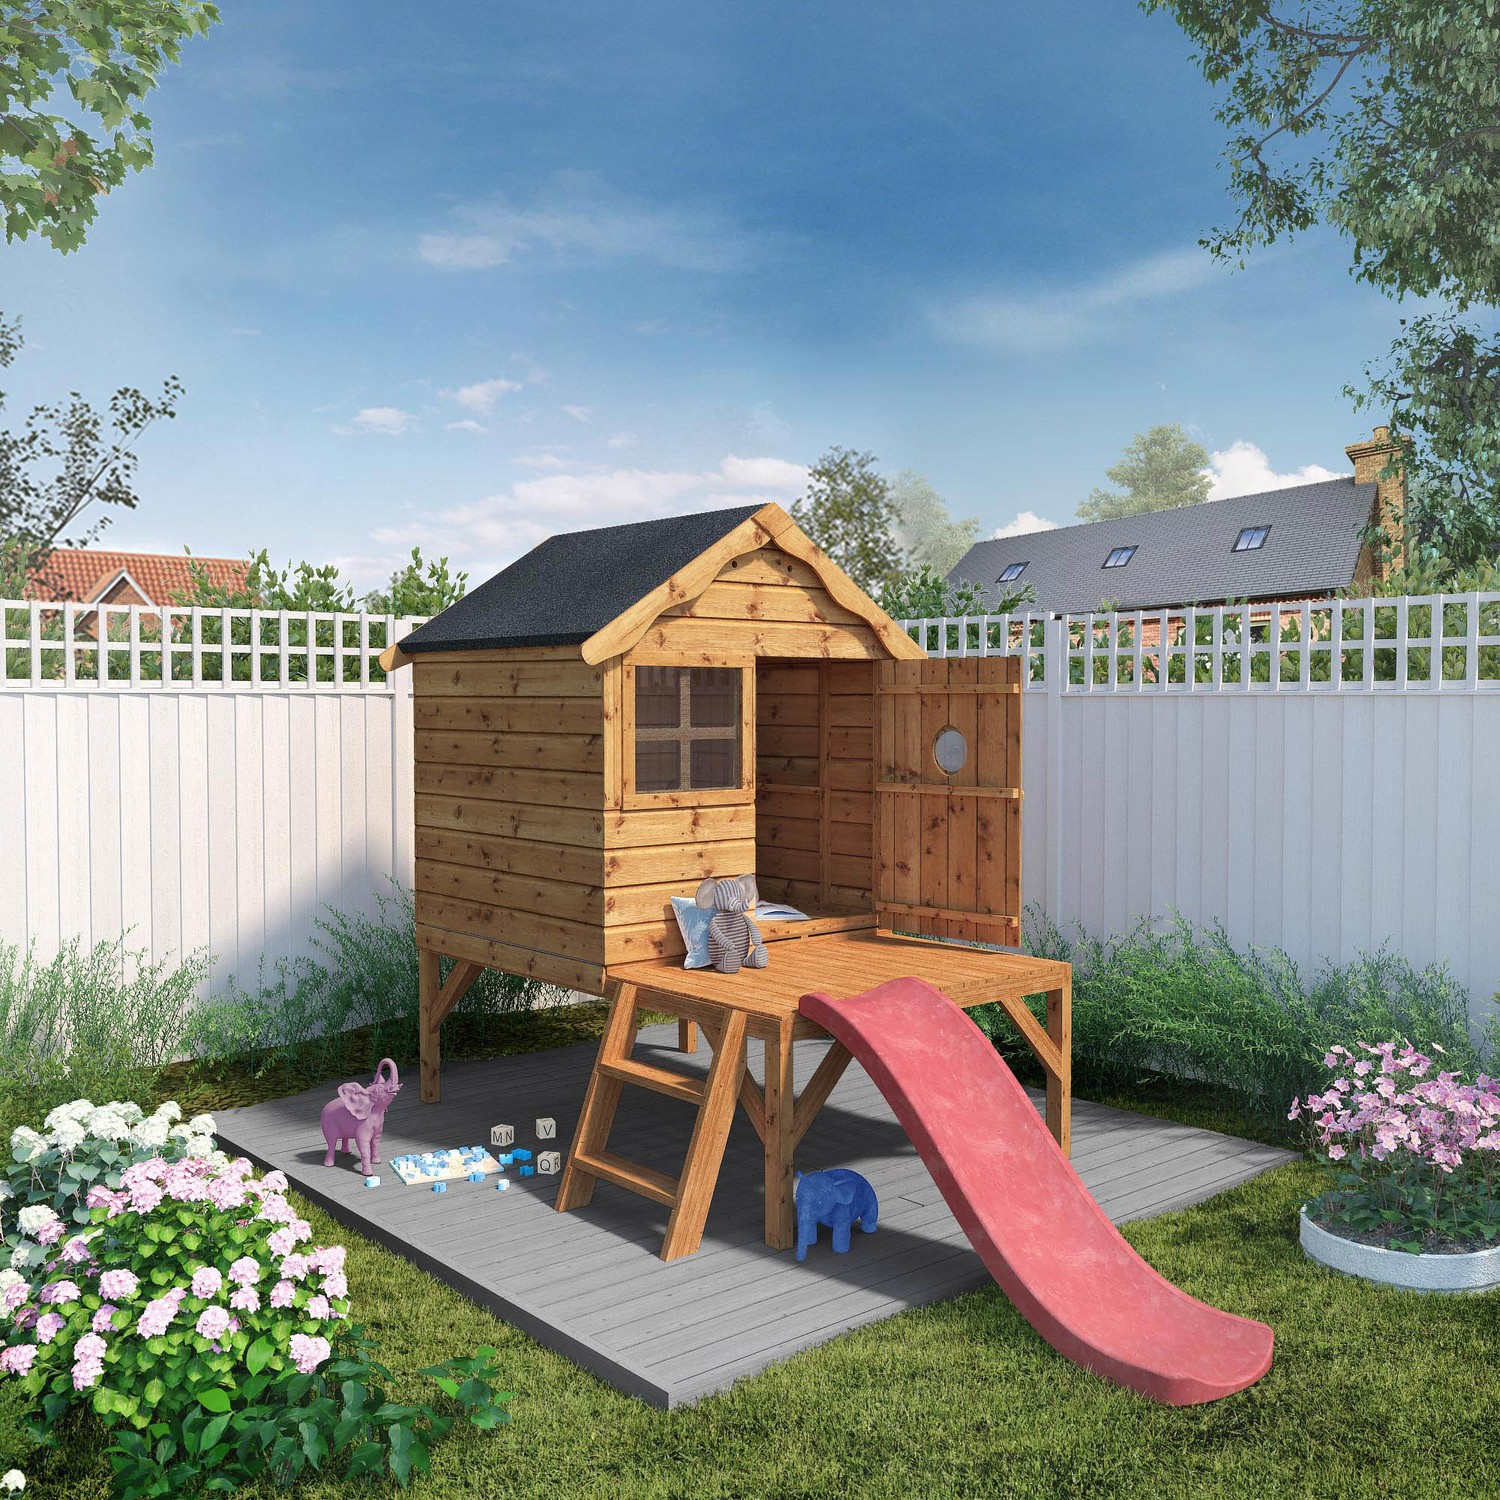 Photo of Mercia - small wooden tower playhouse with slide - snug